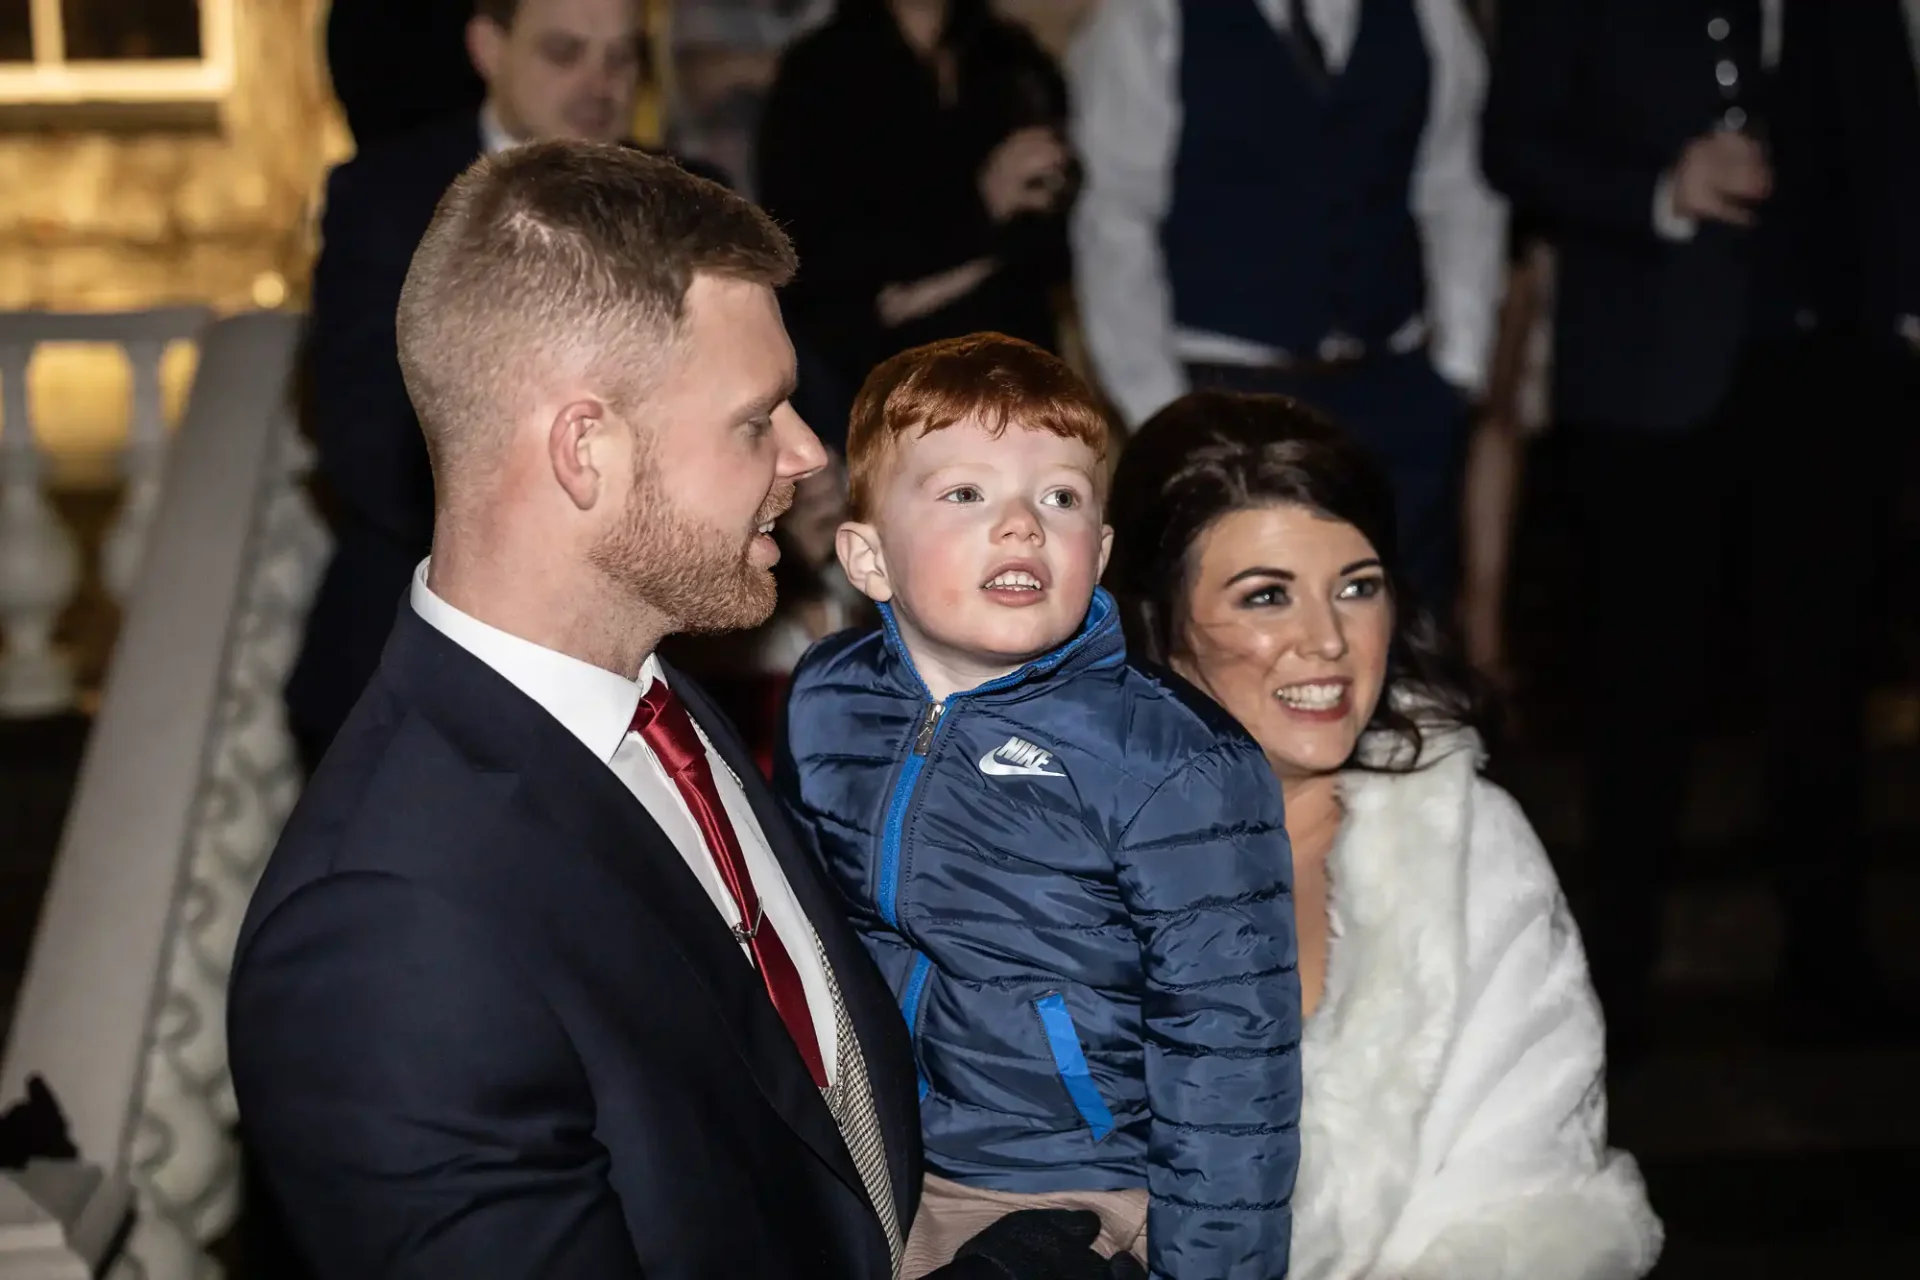 A family at a night event, with a man in a suit and a woman in a white fur coat holding a young boy in a blue jacket. they are smiling and looking up.